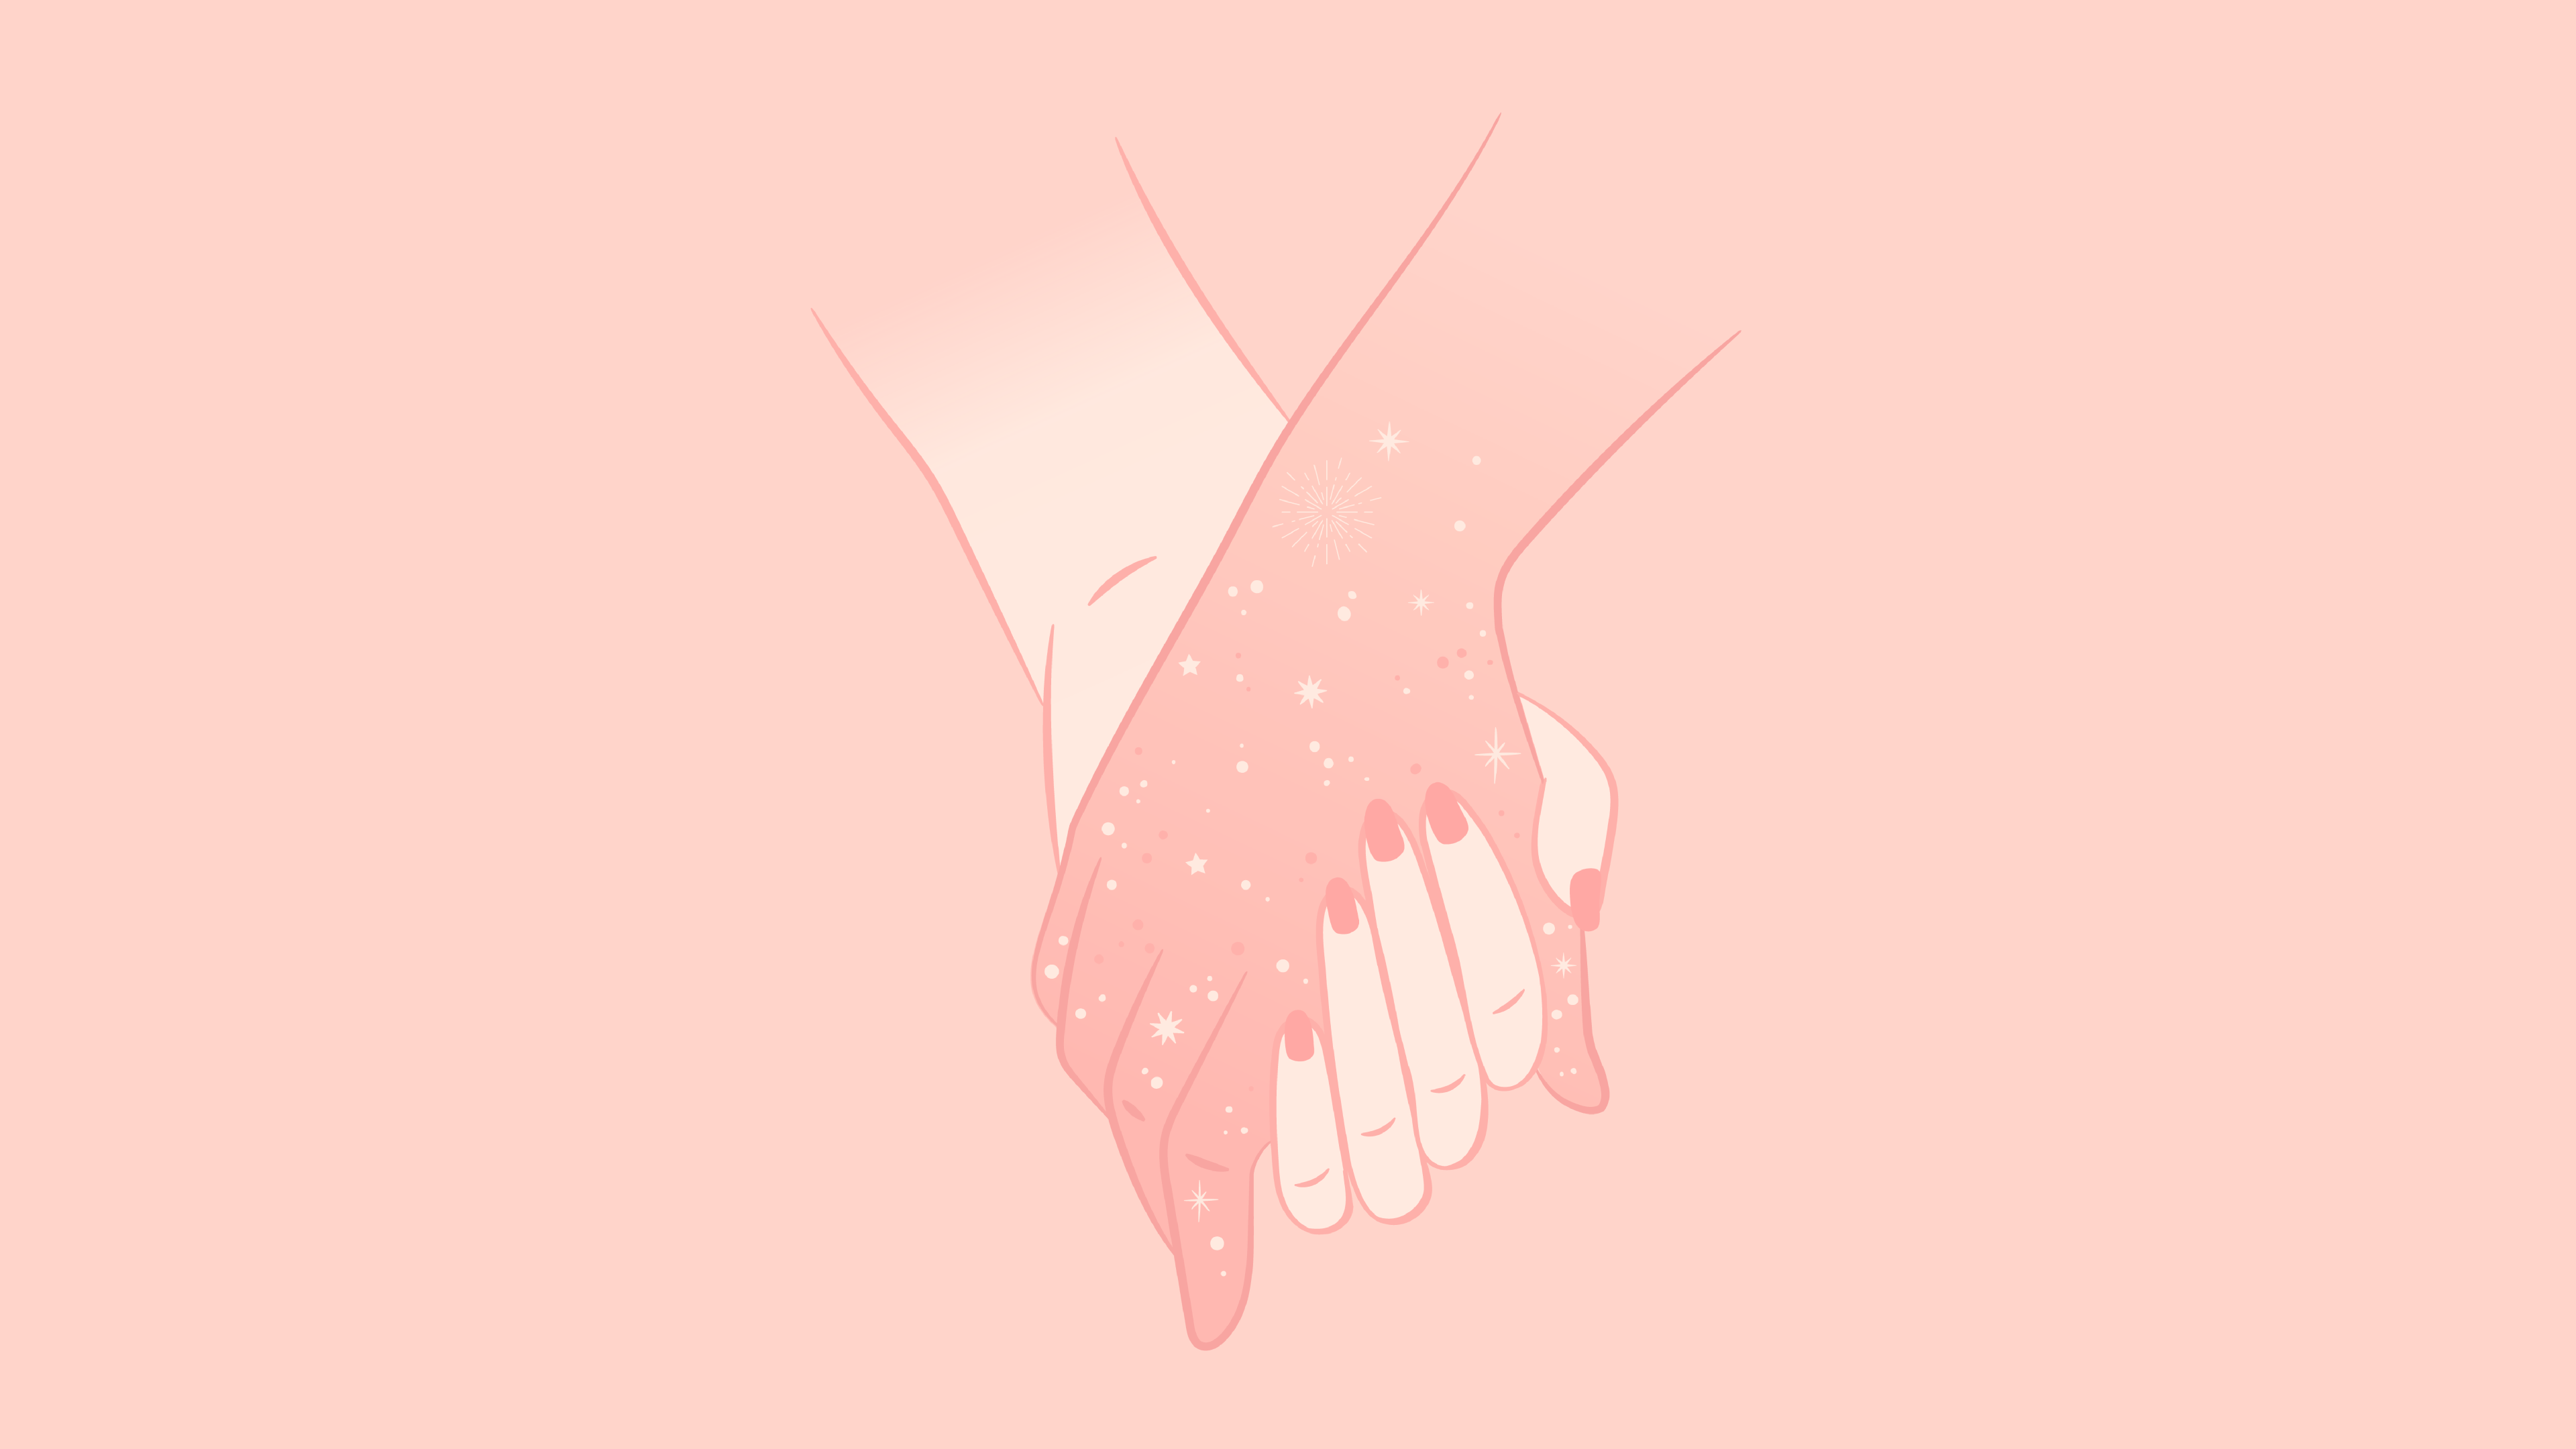 Pink illustration with two hands holding each other.